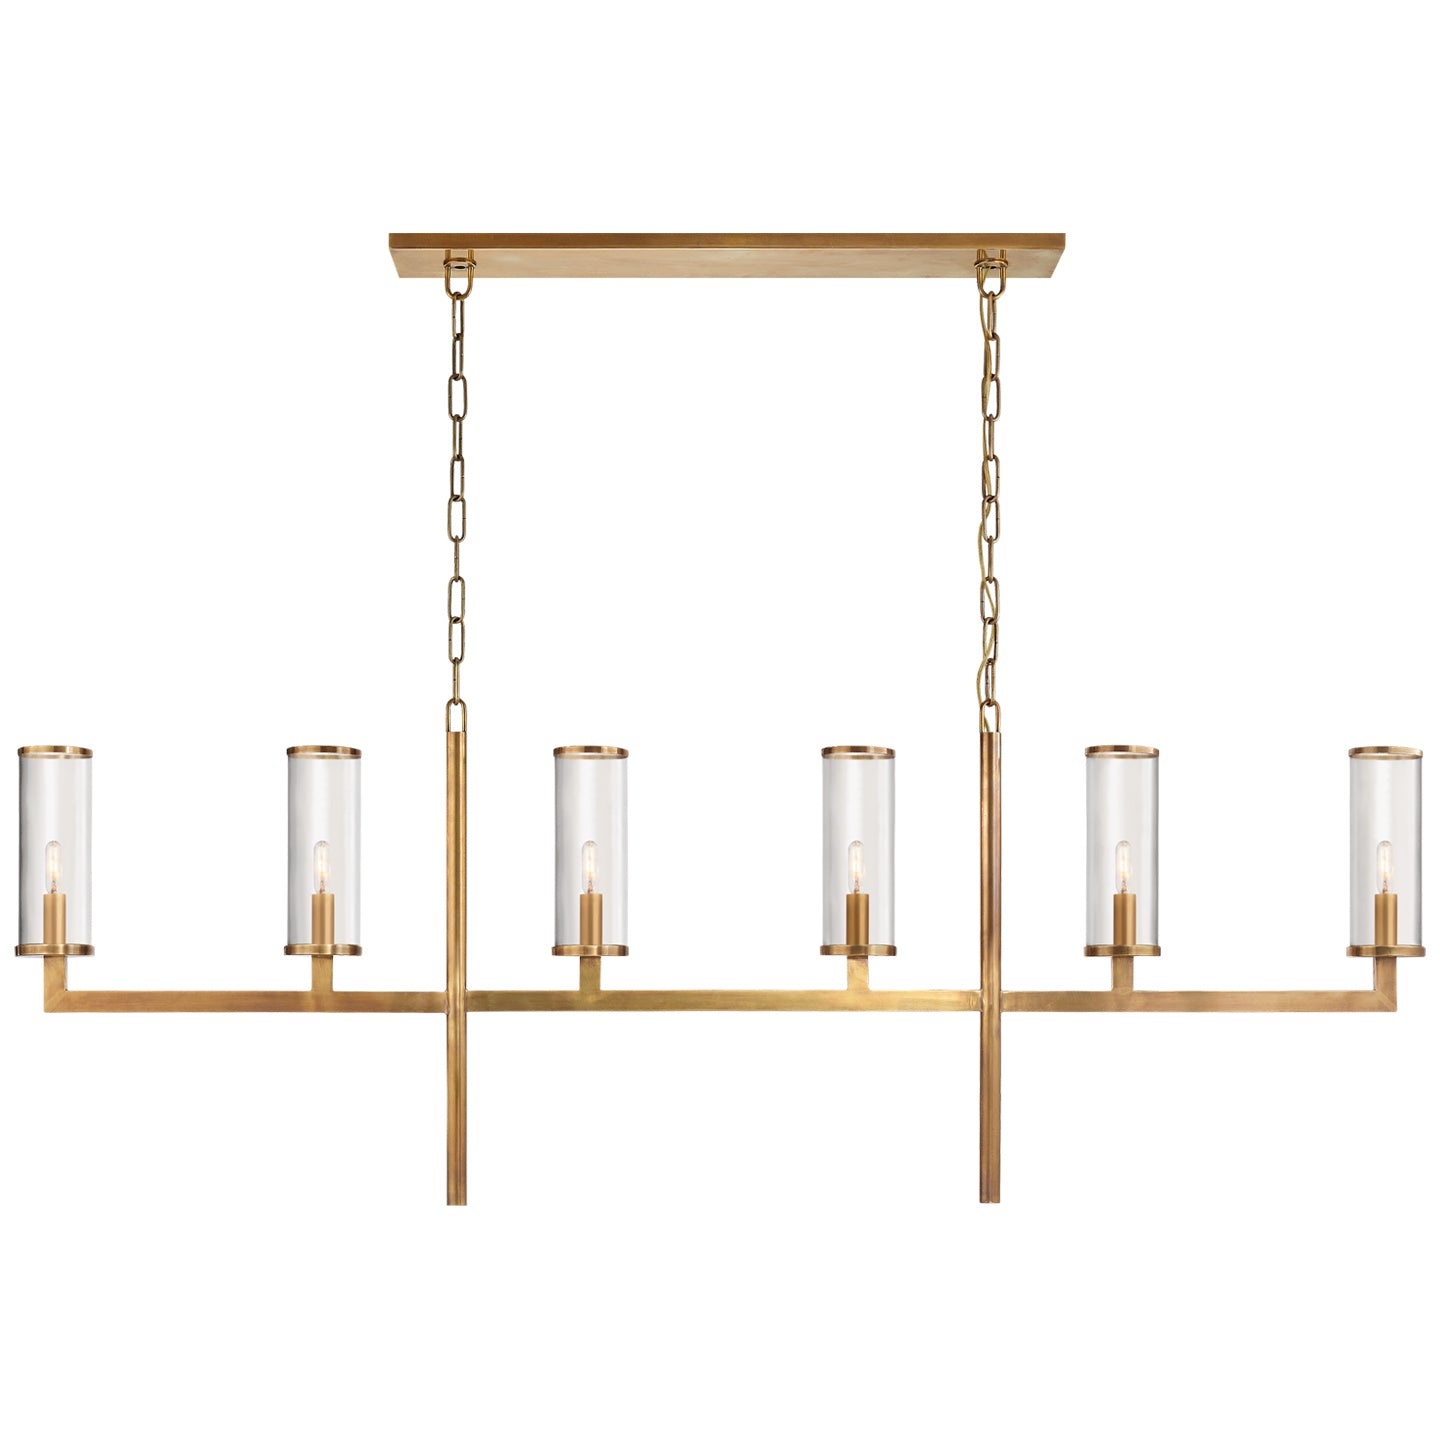 Load image into Gallery viewer, Visual Comfort Signature - KW 5203AB-CG - Six Light Linear Chandelier - Liaison - Antique-Burnished Brass
